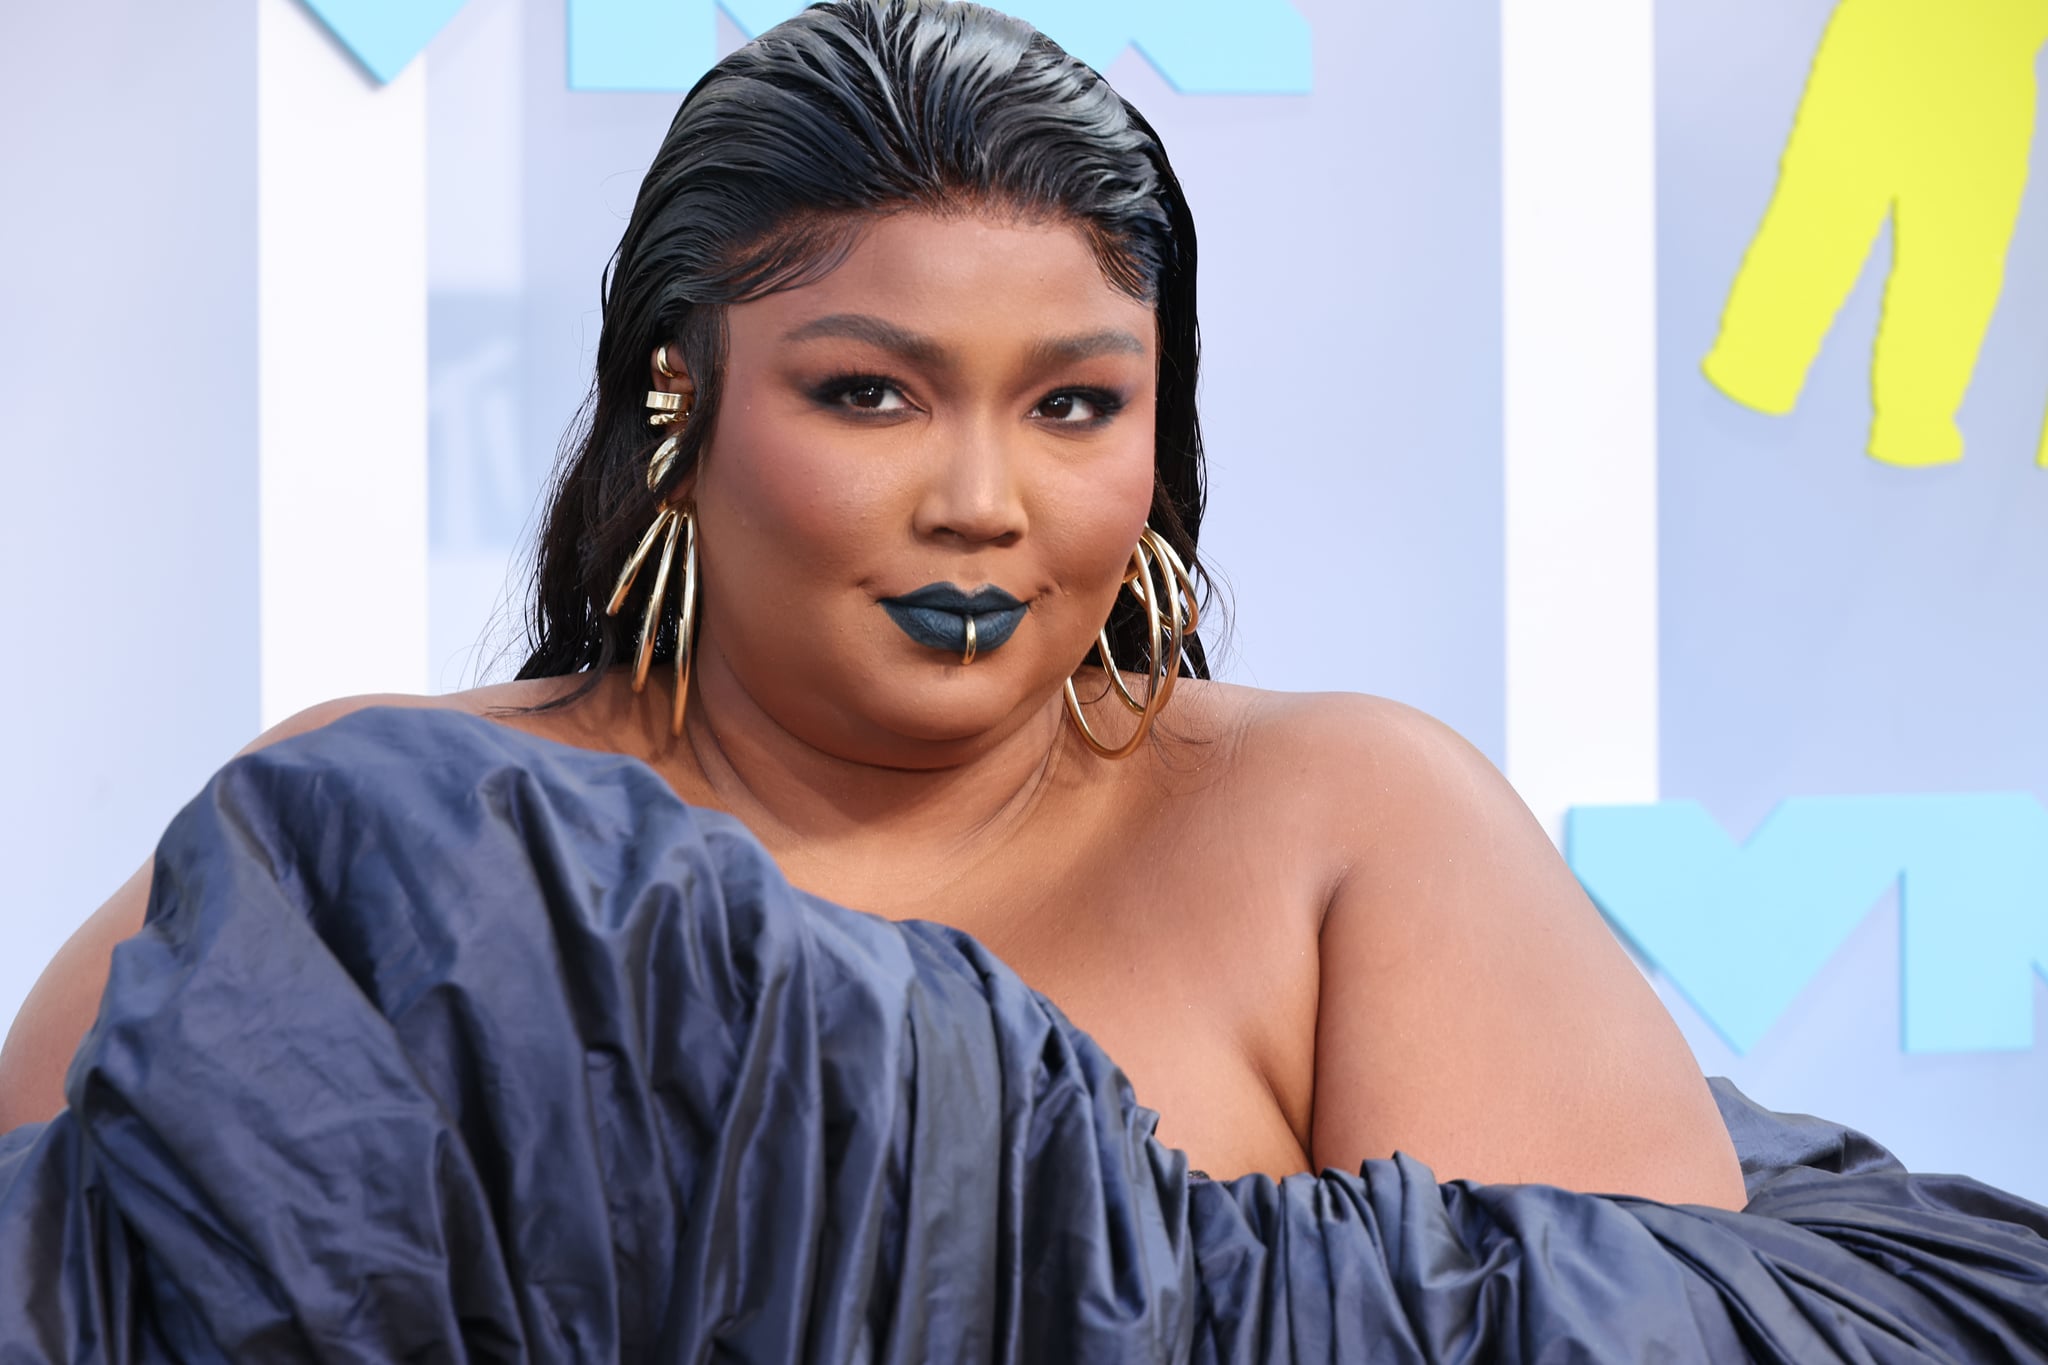 NEWARK, NEW JERSEY - AUGUST 28: Lizzo attends the 2022 MTV VMAs at Prudential Center on August 28, 2022 in Newark, New Jersey. (Photo by Cindy Ord/WireImage)